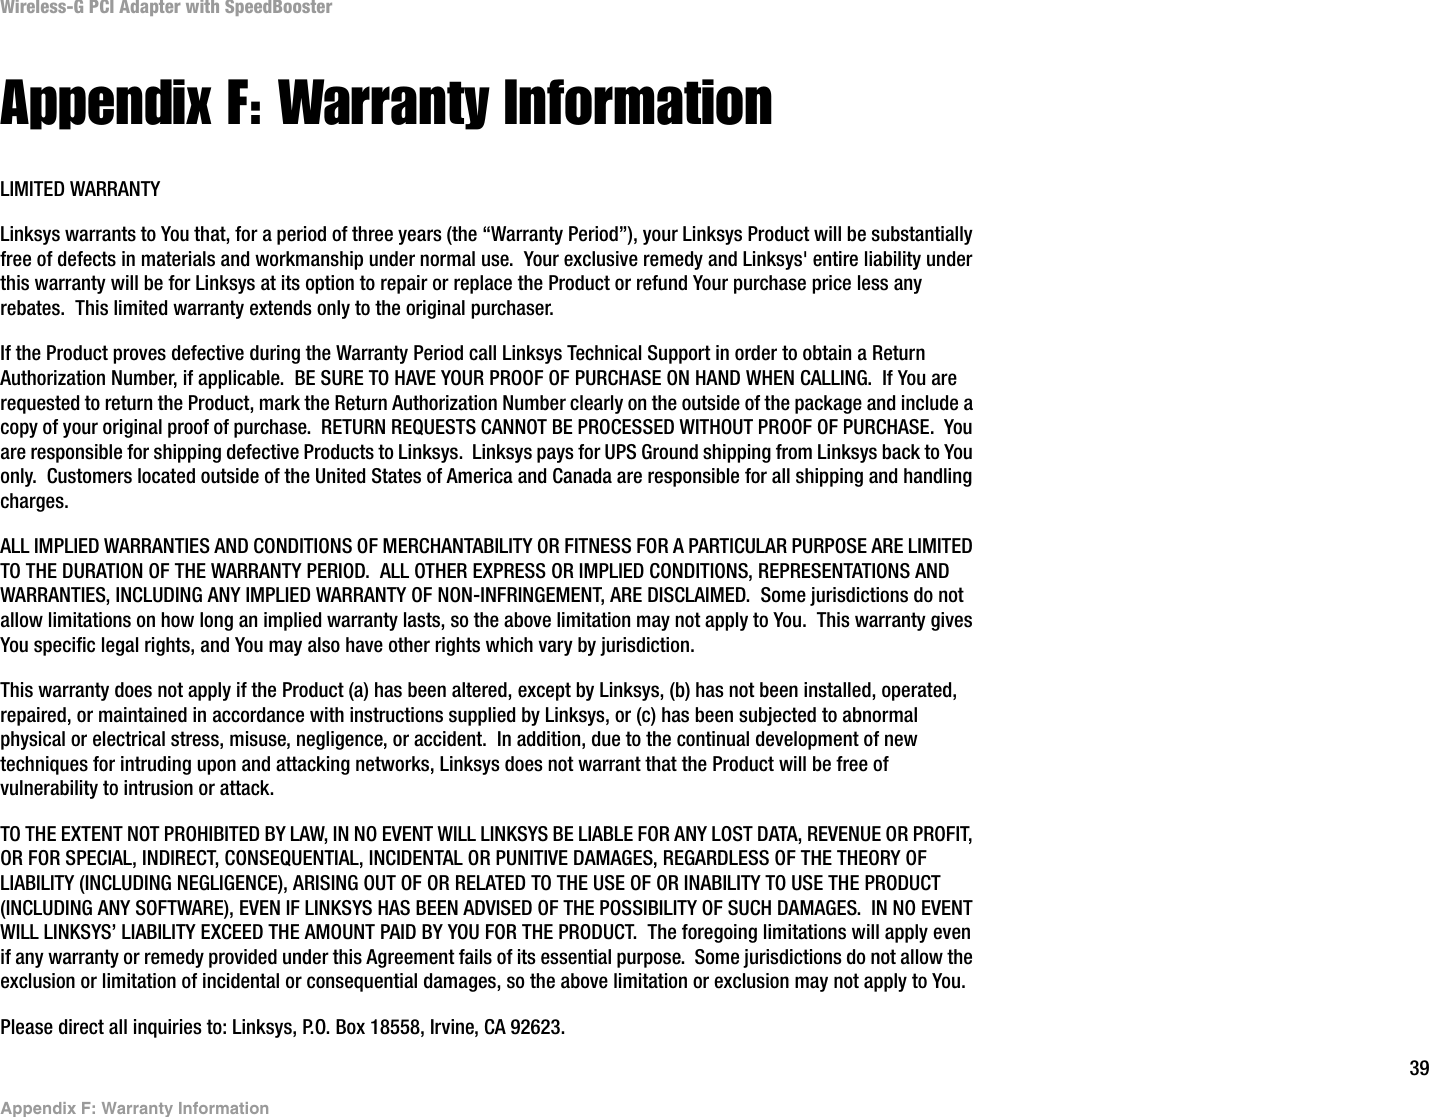 39Appendix F: Warranty InformationWireless-G PCI Adapter with SpeedBoosterAppendix F: Warranty InformationLIMITED WARRANTYLinksys warrants to You that, for a period of three years (the “Warranty Period”), your Linksys Product will be substantially free of defects in materials and workmanship under normal use.  Your exclusive remedy and Linksys&apos; entire liability under this warranty will be for Linksys at its option to repair or replace the Product or refund Your purchase price less any rebates.  This limited warranty extends only to the original purchaser.  If the Product proves defective during the Warranty Period call Linksys Technical Support in order to obtain a Return Authorization Number, if applicable.  BE SURE TO HAVE YOUR PROOF OF PURCHASE ON HAND WHEN CALLING.  If You are requested to return the Product, mark the Return Authorization Number clearly on the outside of the package and include a copy of your original proof of purchase.  RETURN REQUESTS CANNOT BE PROCESSED WITHOUT PROOF OF PURCHASE.  You are responsible for shipping defective Products to Linksys.  Linksys pays for UPS Ground shipping from Linksys back to You only.  Customers located outside of the United States of America and Canada are responsible for all shipping and handling charges. ALL IMPLIED WARRANTIES AND CONDITIONS OF MERCHANTABILITY OR FITNESS FOR A PARTICULAR PURPOSE ARE LIMITED TO THE DURATION OF THE WARRANTY PERIOD.  ALL OTHER EXPRESS OR IMPLIED CONDITIONS, REPRESENTATIONS AND WARRANTIES, INCLUDING ANY IMPLIED WARRANTY OF NON-INFRINGEMENT, ARE DISCLAIMED.  Some jurisdictions do not allow limitations on how long an implied warranty lasts, so the above limitation may not apply to You.  This warranty gives You specific legal rights, and You may also have other rights which vary by jurisdiction.This warranty does not apply if the Product (a) has been altered, except by Linksys, (b) has not been installed, operated, repaired, or maintained in accordance with instructions supplied by Linksys, or (c) has been subjected to abnormal physical or electrical stress, misuse, negligence, or accident.  In addition, due to the continual development of new techniques for intruding upon and attacking networks, Linksys does not warrant that the Product will be free of vulnerability to intrusion or attack.TO THE EXTENT NOT PROHIBITED BY LAW, IN NO EVENT WILL LINKSYS BE LIABLE FOR ANY LOST DATA, REVENUE OR PROFIT, OR FOR SPECIAL, INDIRECT, CONSEQUENTIAL, INCIDENTAL OR PUNITIVE DAMAGES, REGARDLESS OF THE THEORY OF LIABILITY (INCLUDING NEGLIGENCE), ARISING OUT OF OR RELATED TO THE USE OF OR INABILITY TO USE THE PRODUCT (INCLUDING ANY SOFTWARE), EVEN IF LINKSYS HAS BEEN ADVISED OF THE POSSIBILITY OF SUCH DAMAGES.  IN NO EVENT WILL LINKSYS’ LIABILITY EXCEED THE AMOUNT PAID BY YOU FOR THE PRODUCT.  The foregoing limitations will apply even if any warranty or remedy provided under this Agreement fails of its essential purpose.  Some jurisdictions do not allow the exclusion or limitation of incidental or consequential damages, so the above limitation or exclusion may not apply to You.Please direct all inquiries to: Linksys, P.O. Box 18558, Irvine, CA 92623.